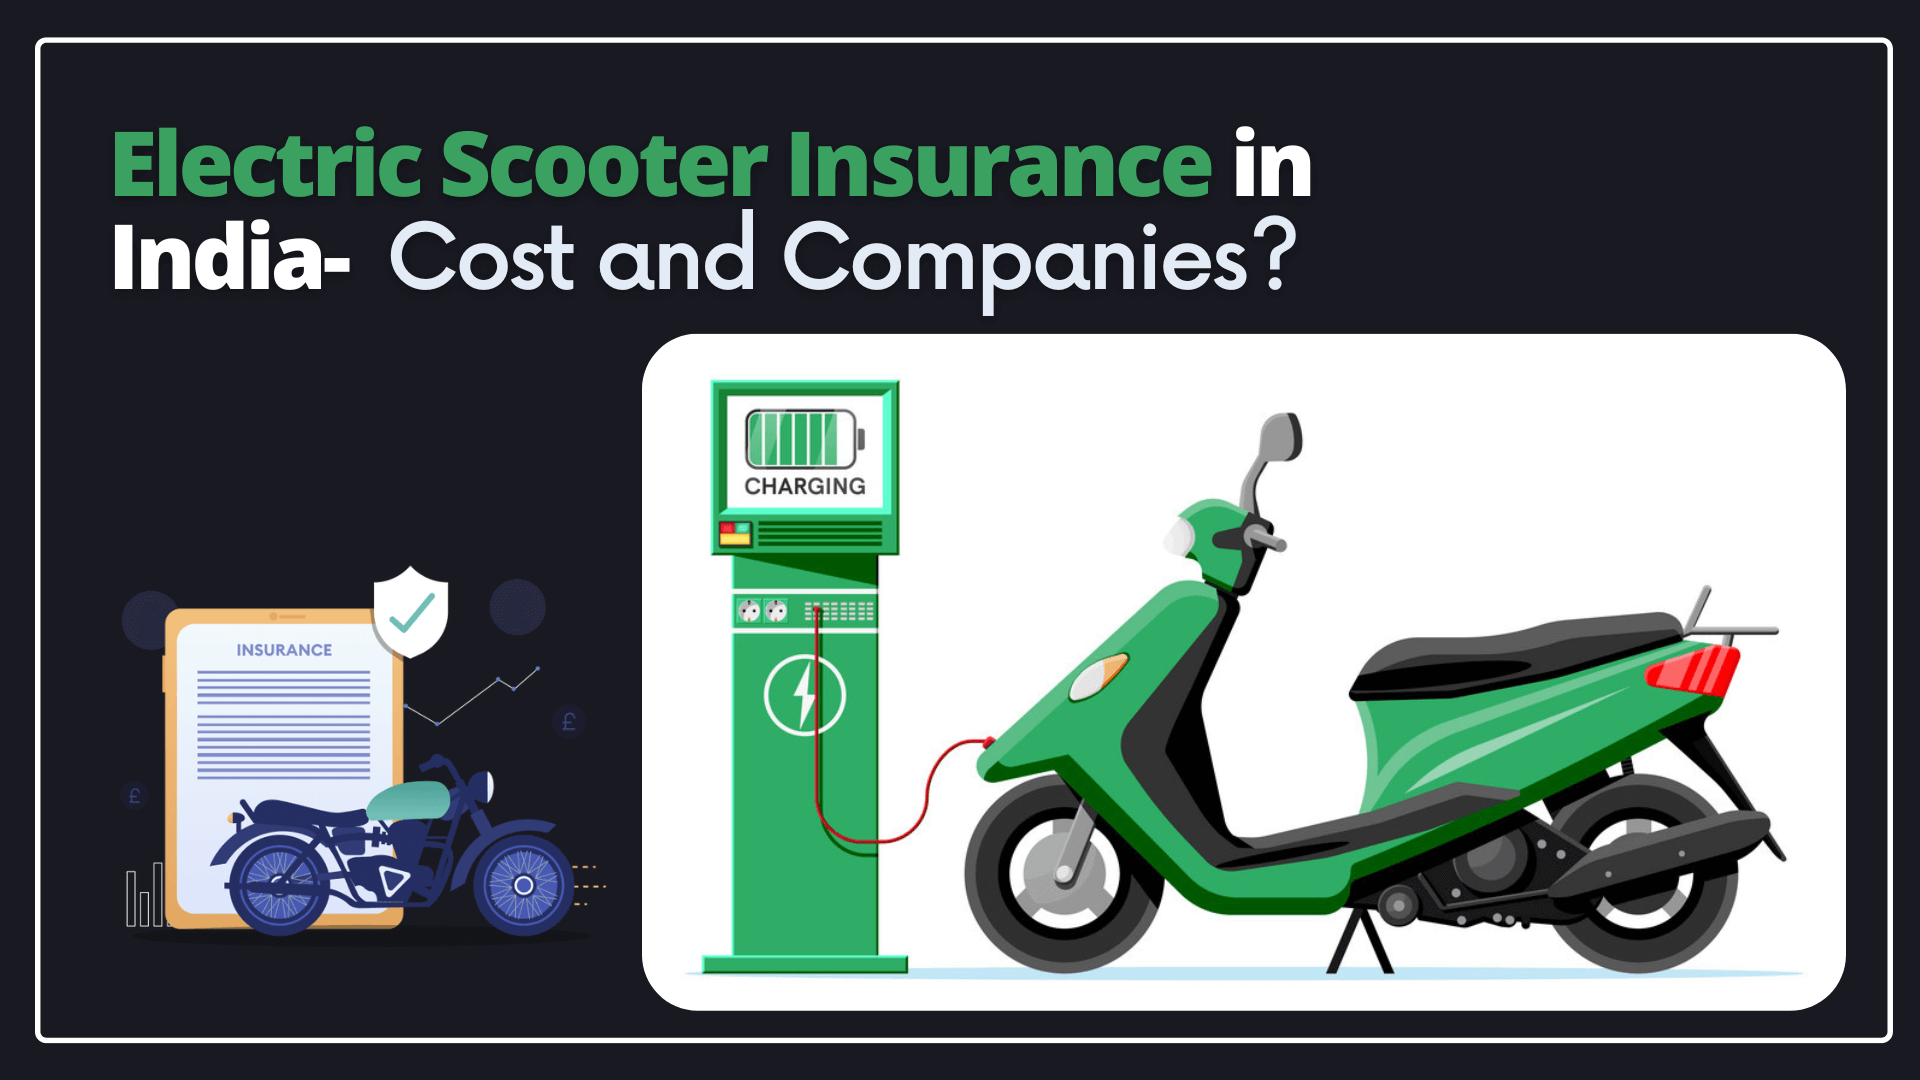 https://e-vehicleinfo.com/electric-scooter-insurance-india-cost-and-companies/